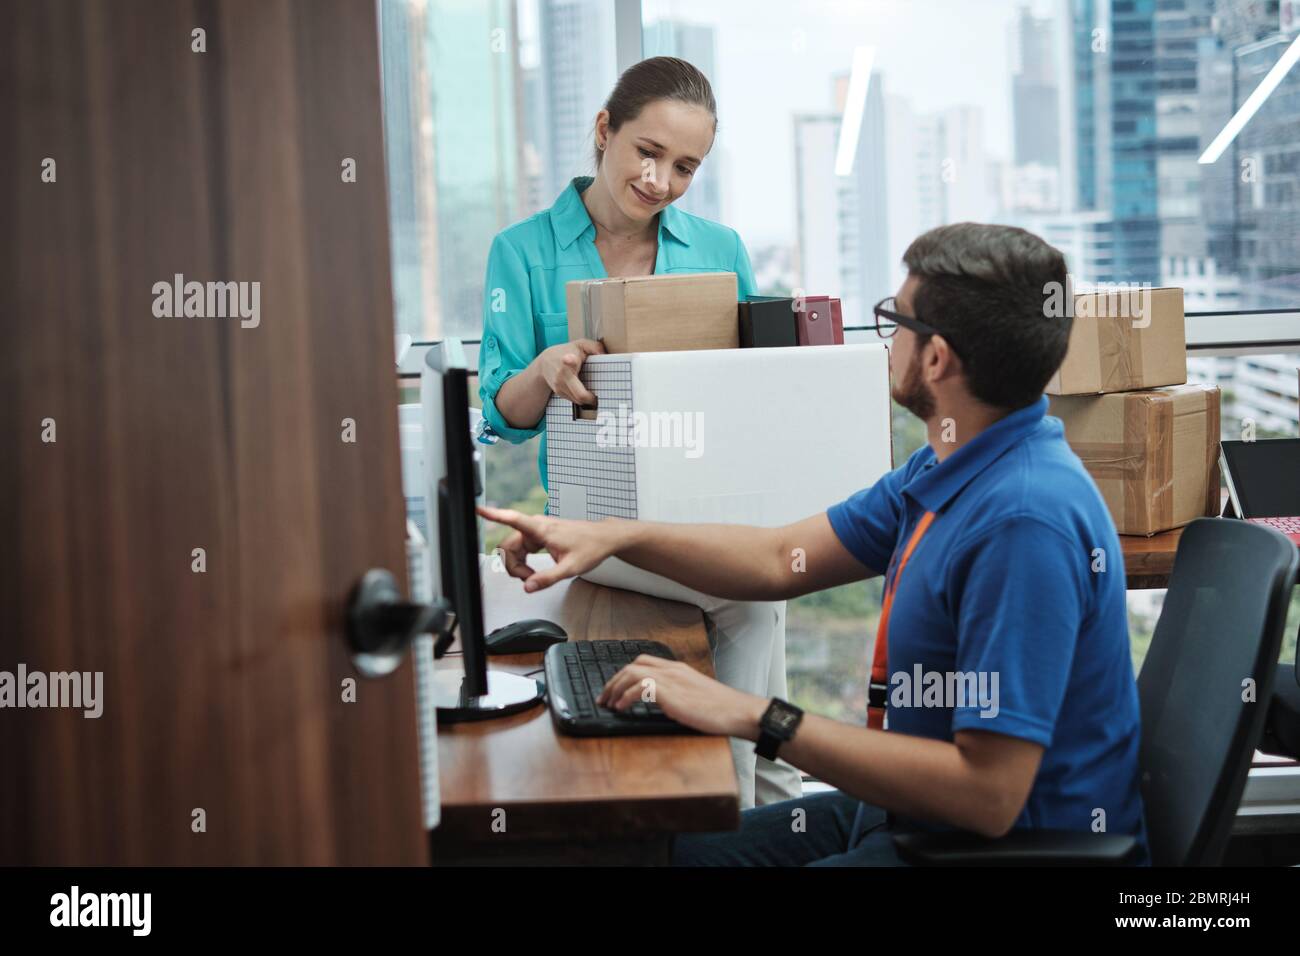 IT Expert Setting Computer To Woman Moving Into New Office Stock Photo